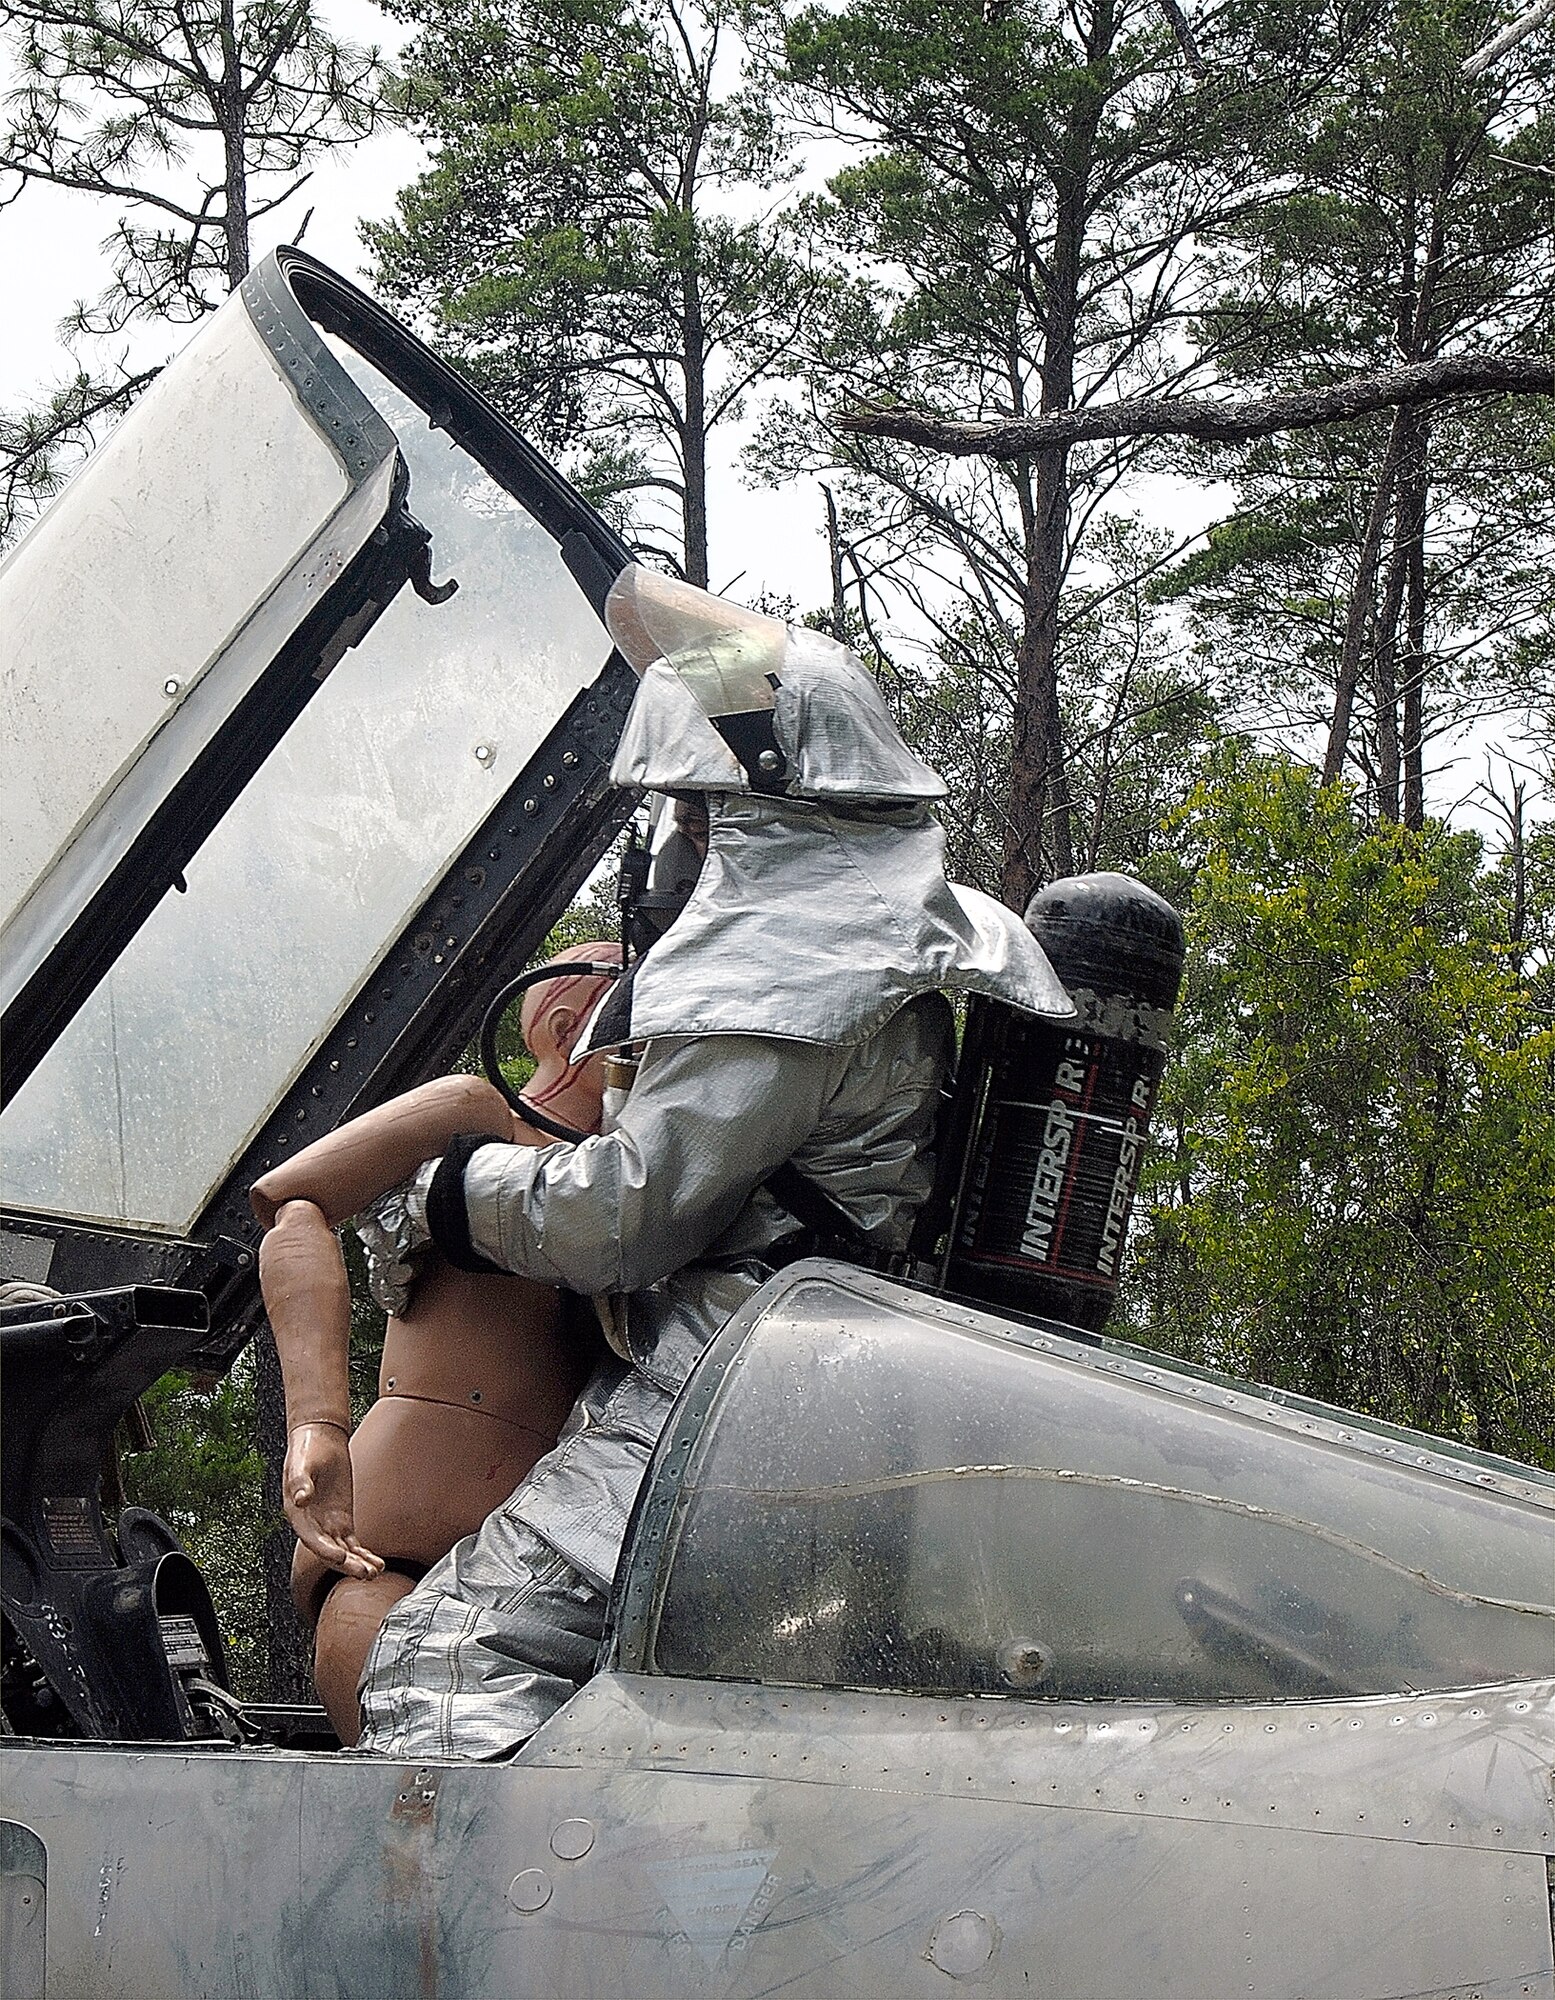 A 442nd Civil Engineer Squadron firefighter from Whiteman Air Force Base, Mo., "rescues" a crewmember from a "crashed " aircraft at the Silver Flag exercise area at Tyndall AFB, Fla..
Detachment 1, 823rd RED HORSE (Rapid Engineer Deployable Heavy Operational Repair Squadron Engineers) Squadron at Tyndall hosts the exercise and used a decommissioned F-4 Phantom fighter placed in the woods on the Silver Flag site to provide a more realistic scenario of an aircraft crash as a training aid. (US Air Force photo/Master Sgt. Bill Huntington)